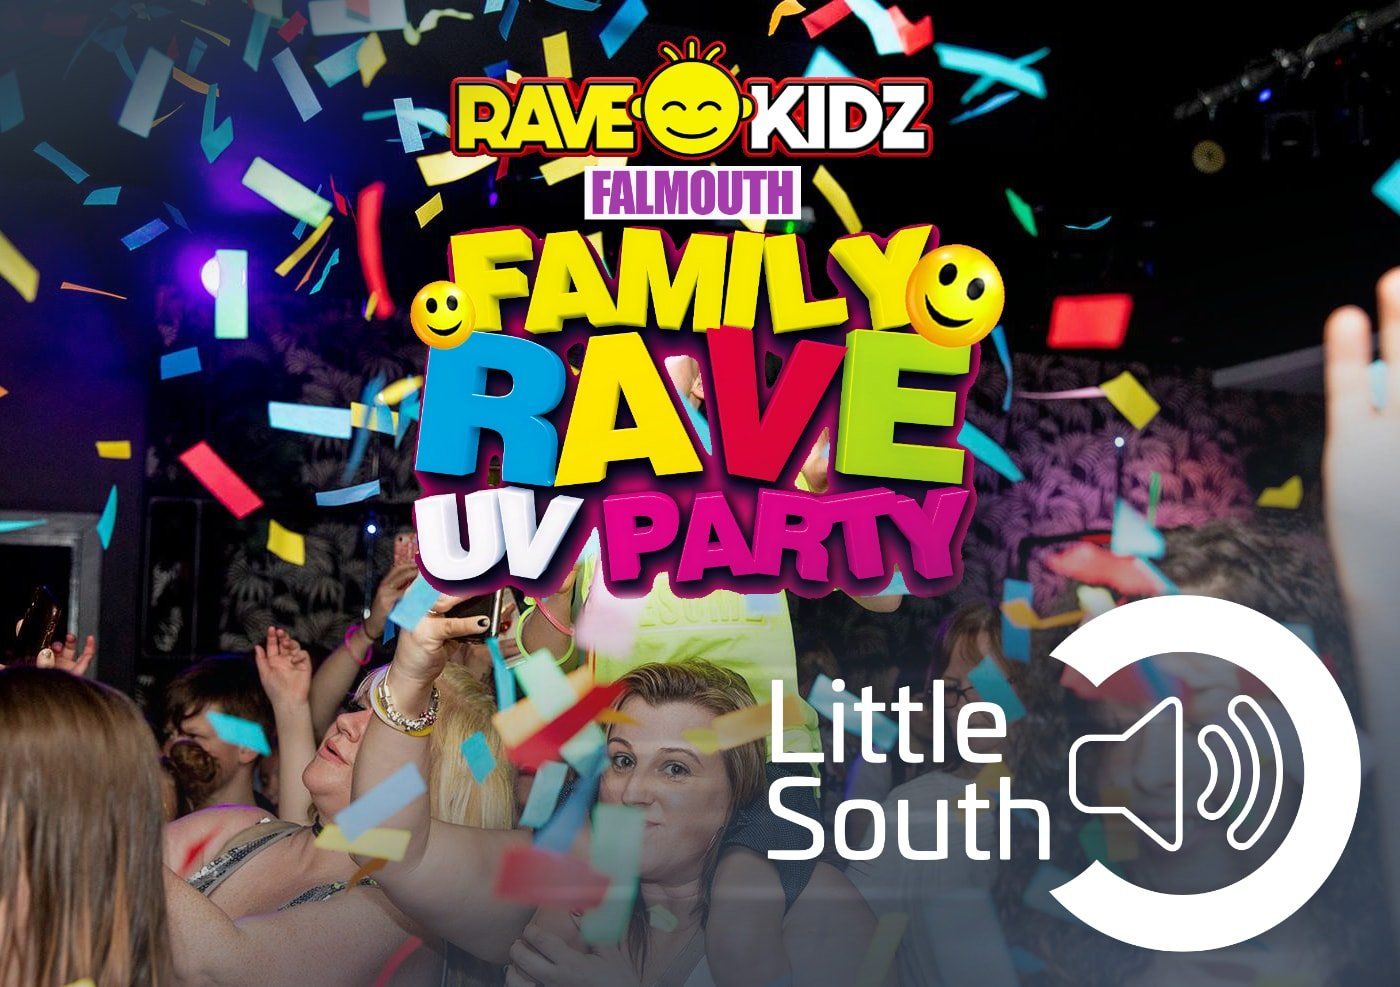 Rave-Kidz Event Planned For Falmouth